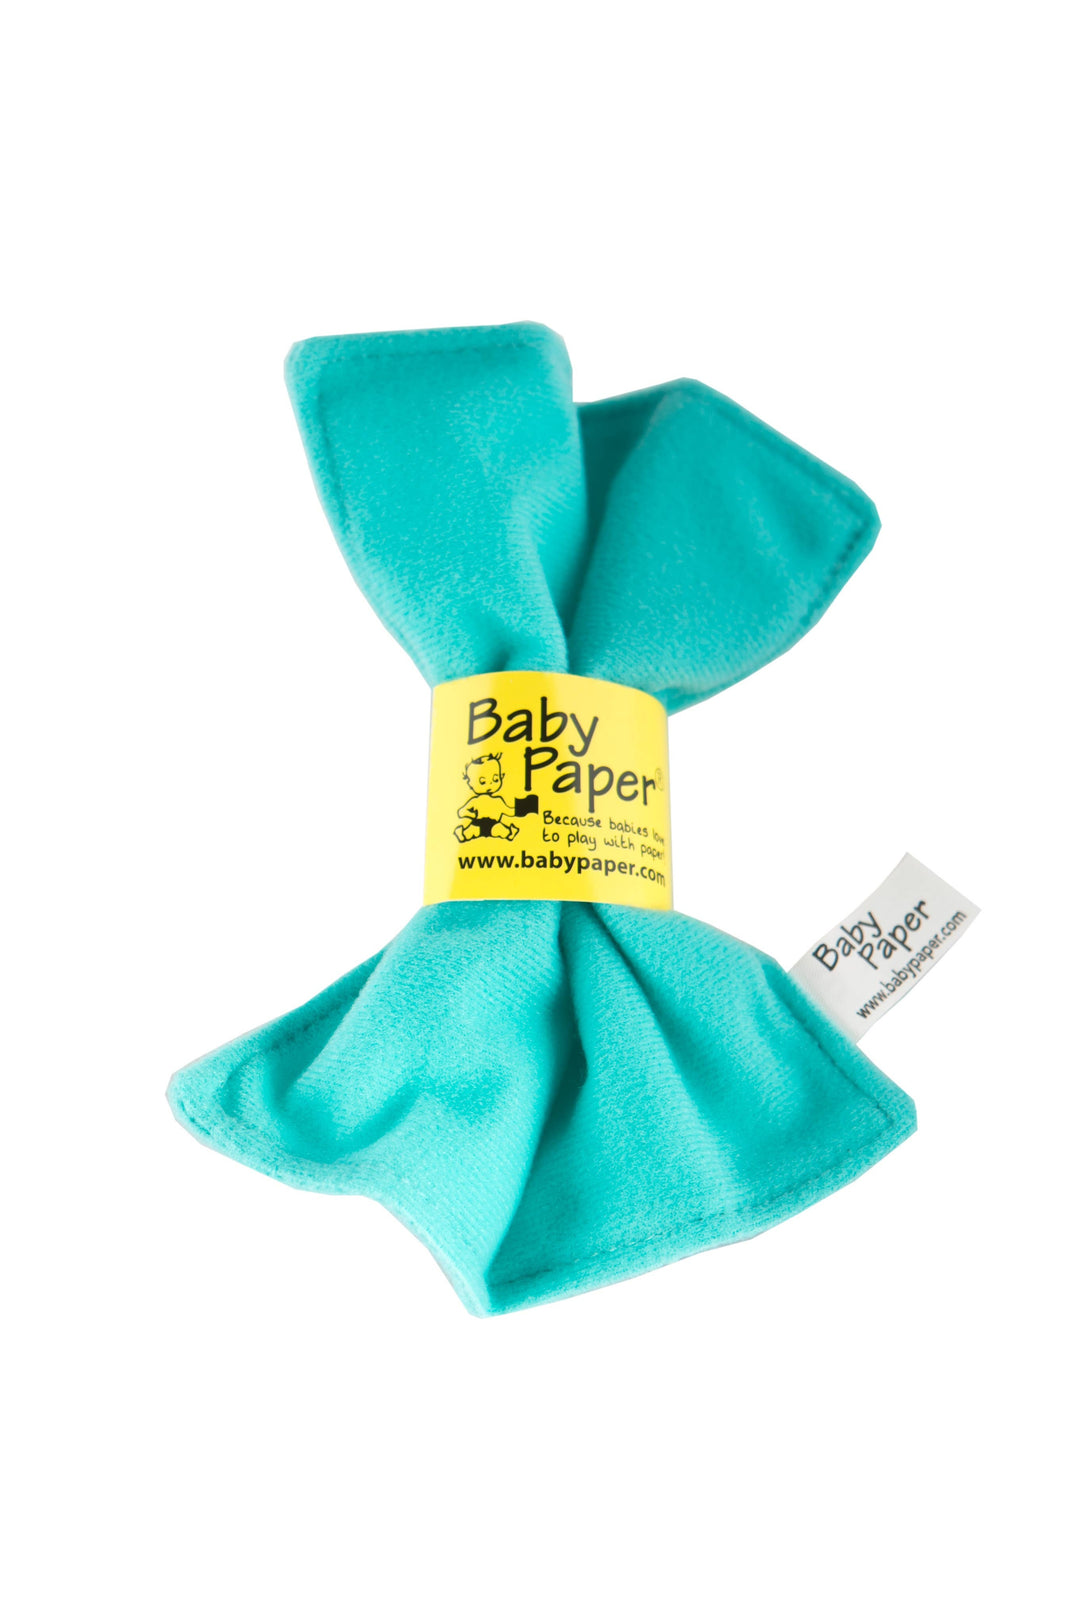 BABY PAPER - Turquoise Baby Paper